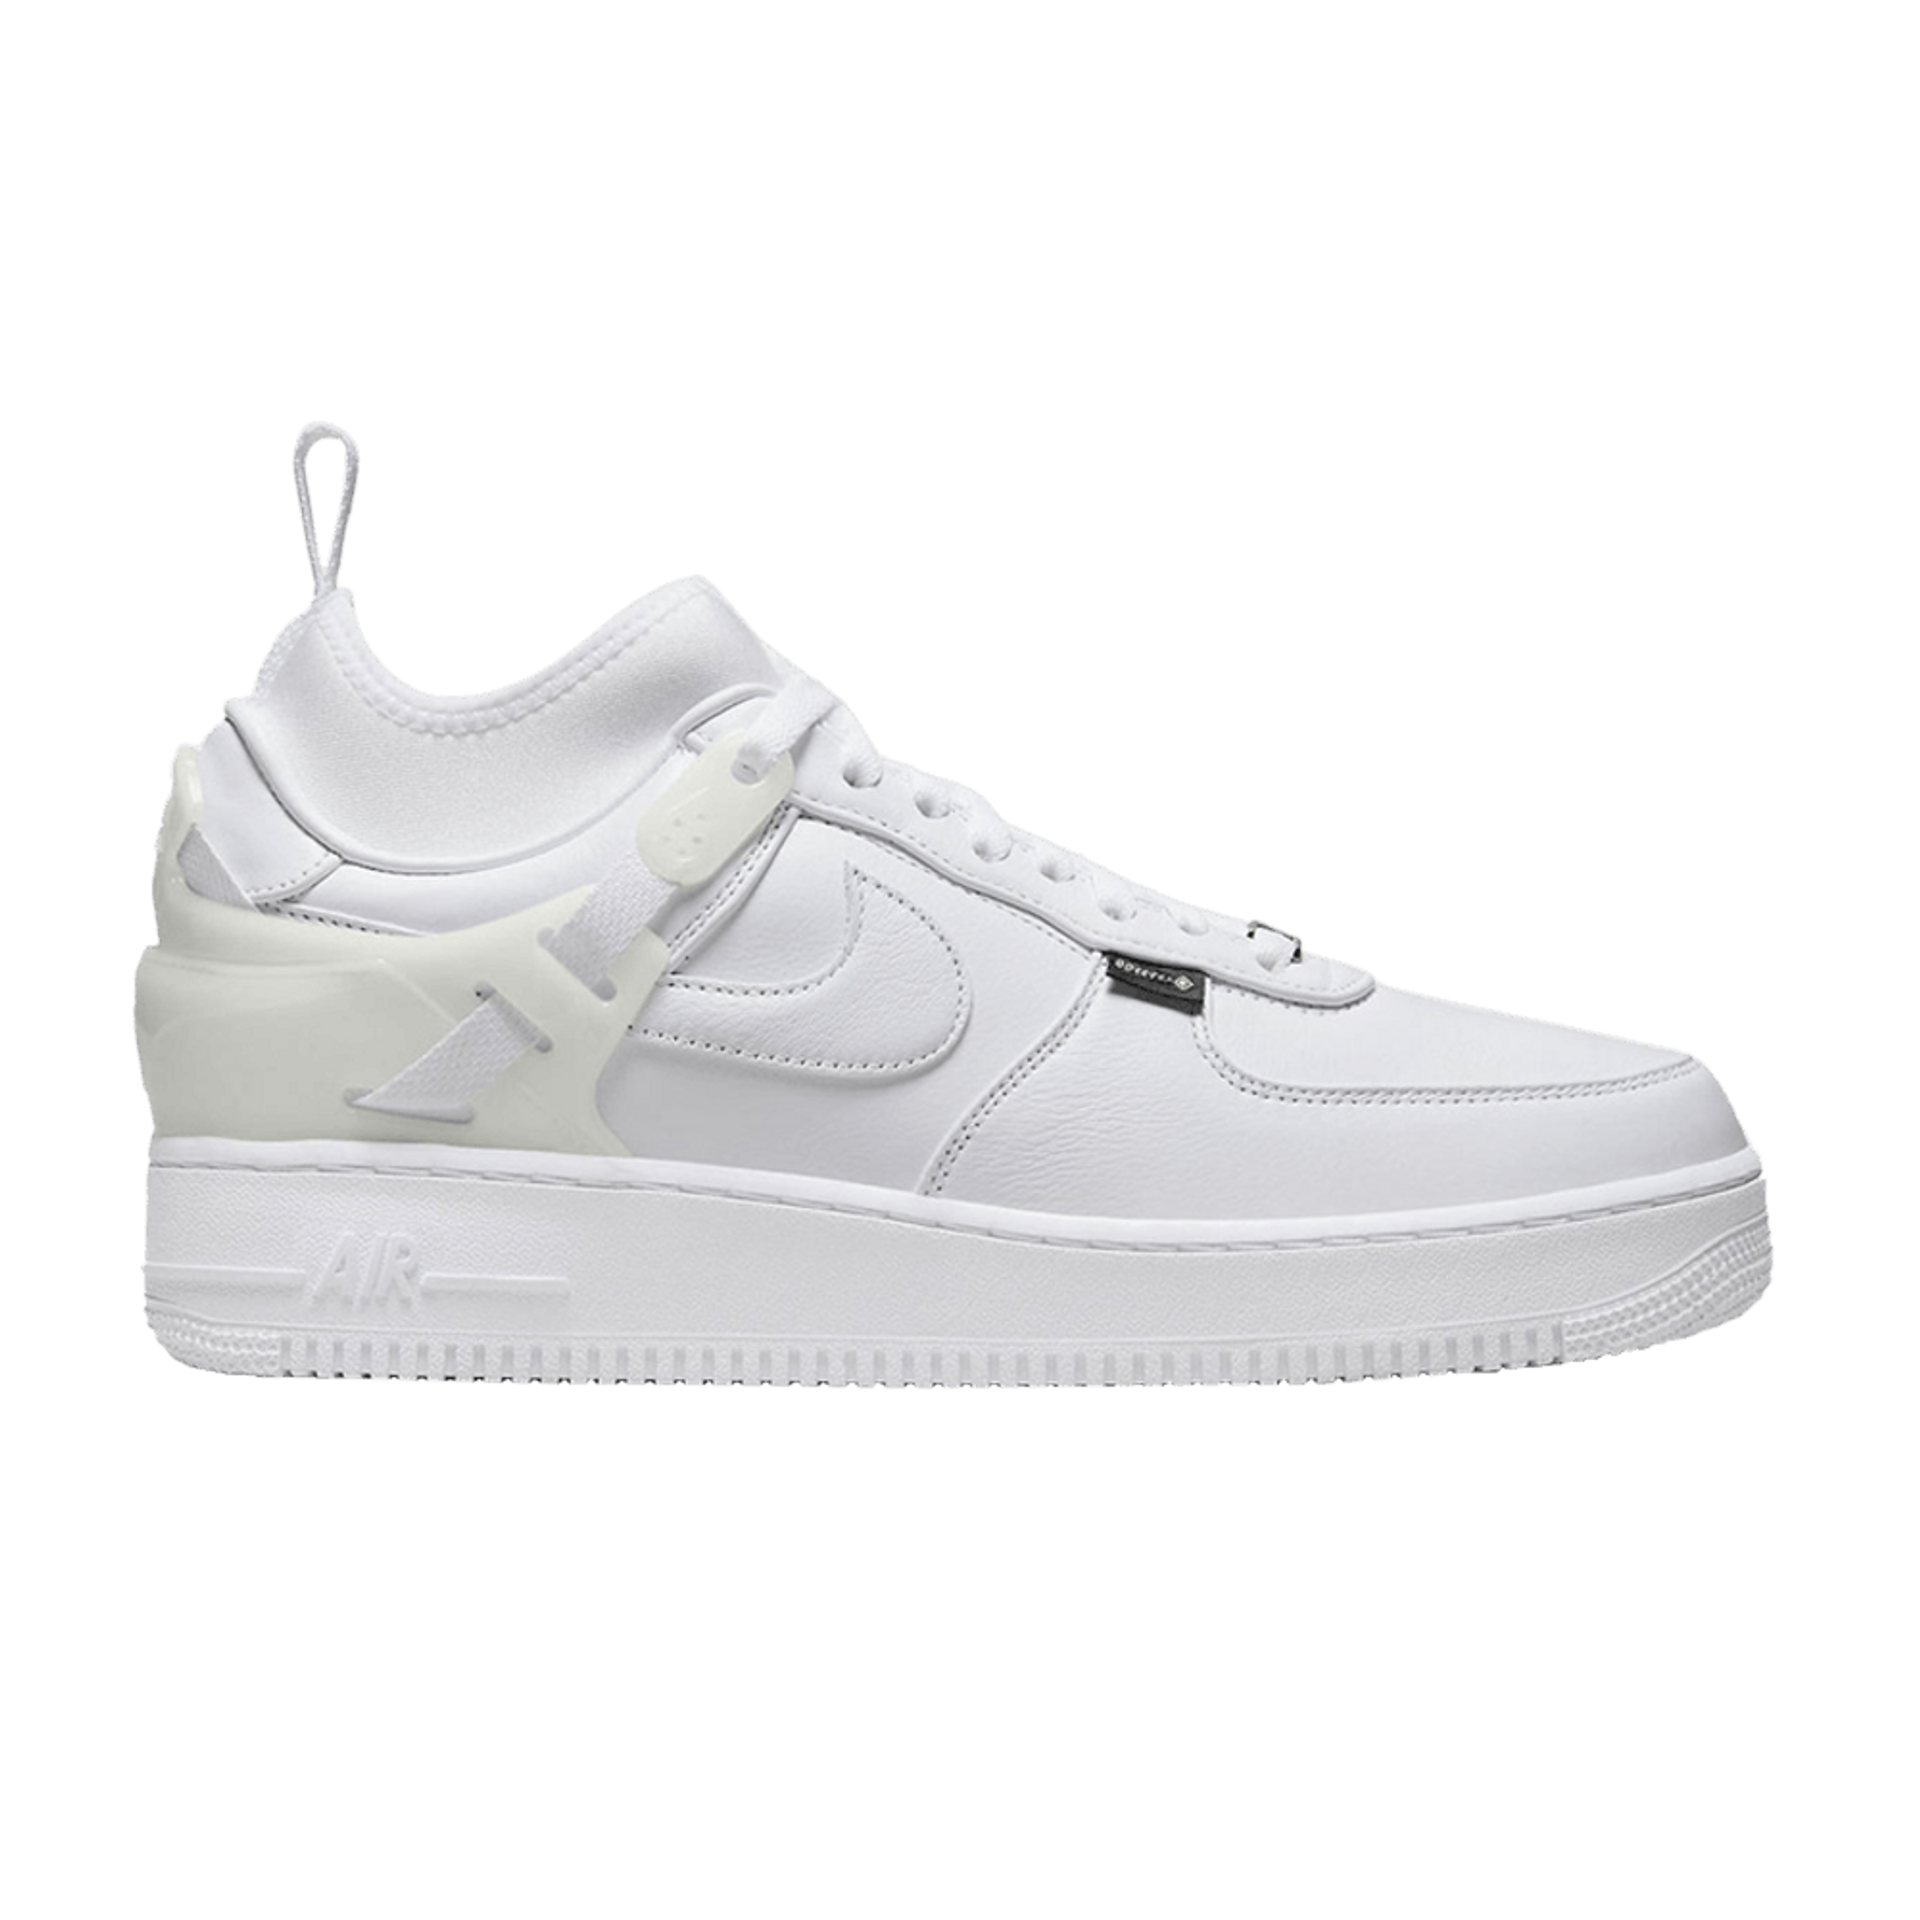 Nike Undercover x Air Force 1 Low SP GORE-TEX 'Triple White'